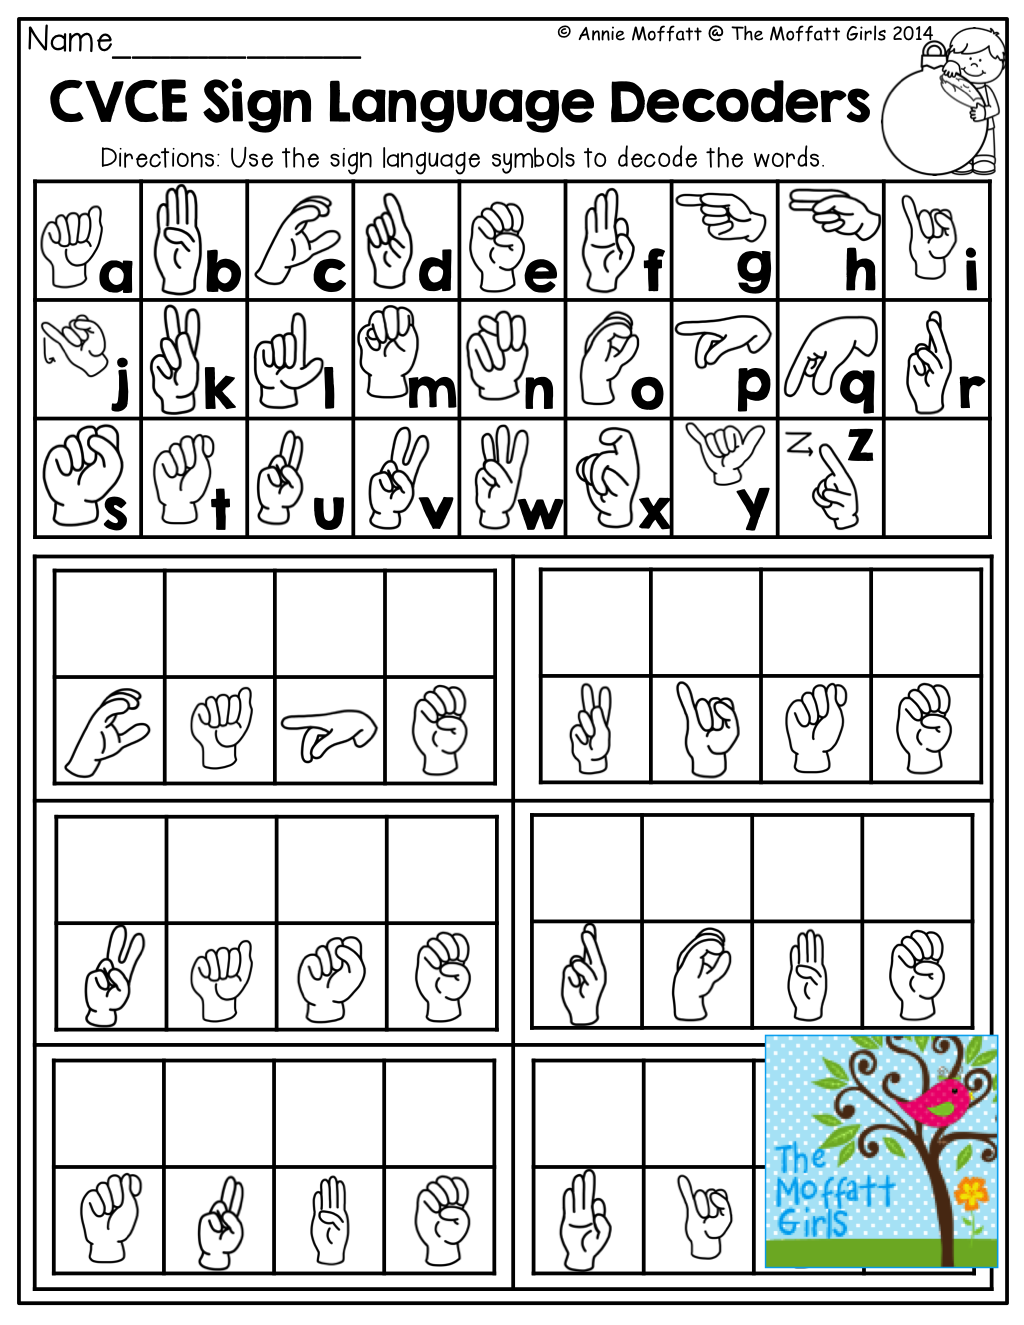 CVCE Sign Language Decoders And TONS Of Other FUN And Engaging Resources Sign Language Words Sign Language Sign Language Lessons